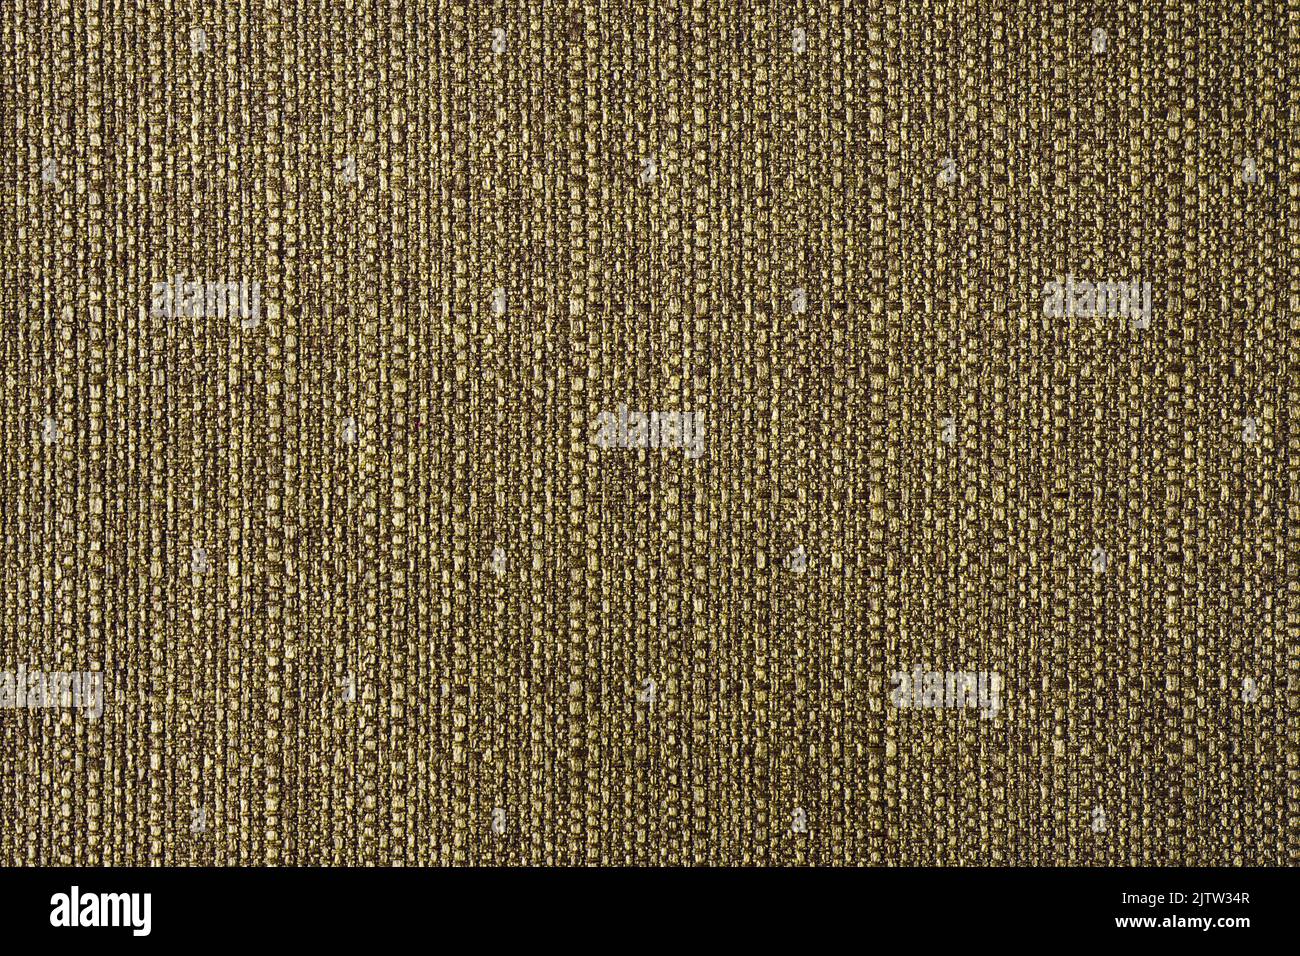 Seamless texture of blank piece of coarse cloth, natural rustic